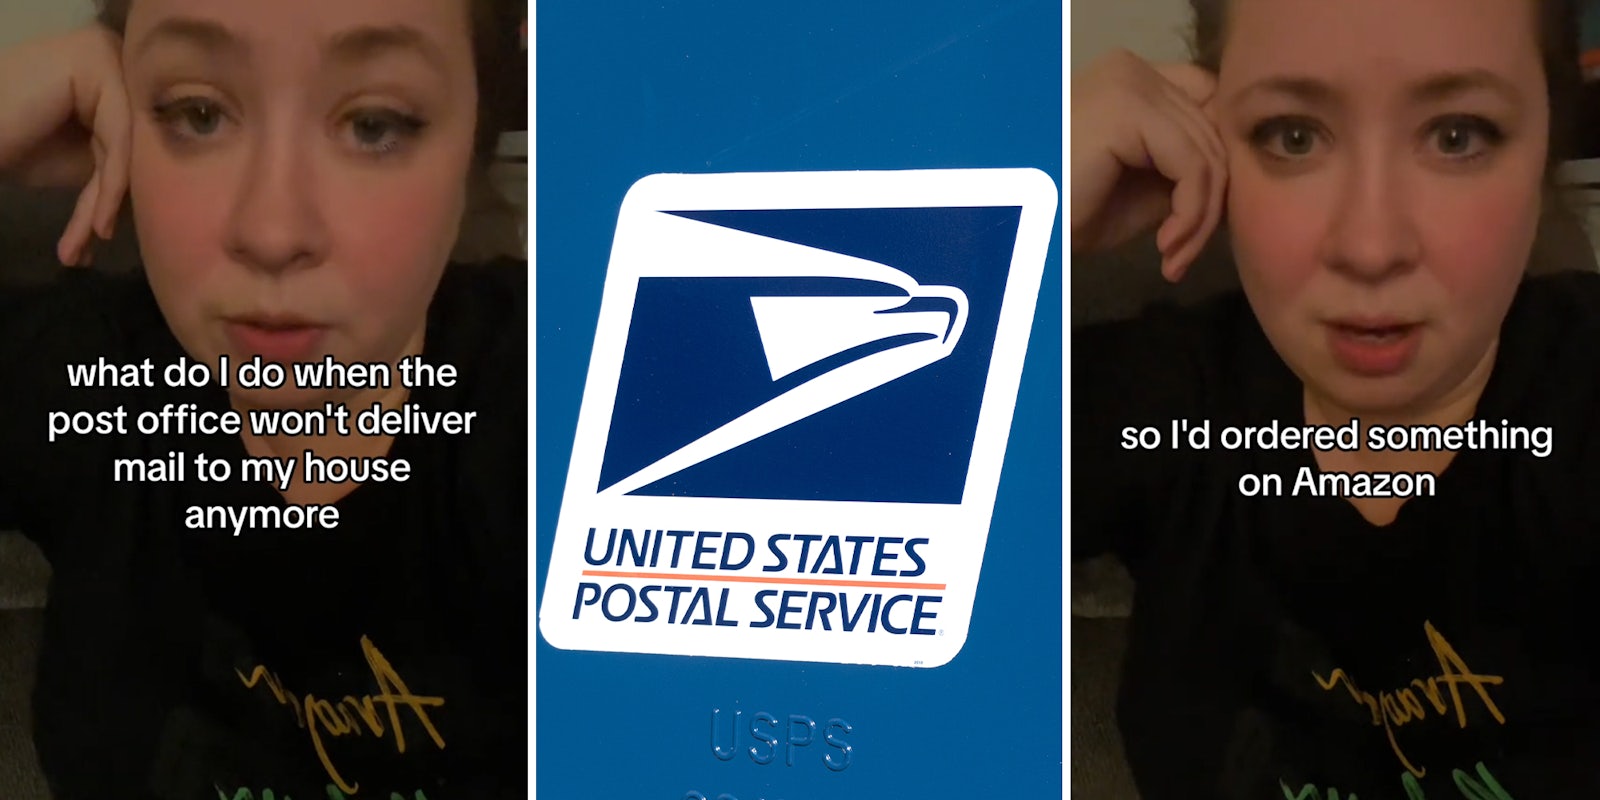 Woman says USPS won’t deliver to her house because a worker got bitten by a dog. She doesn’t have one